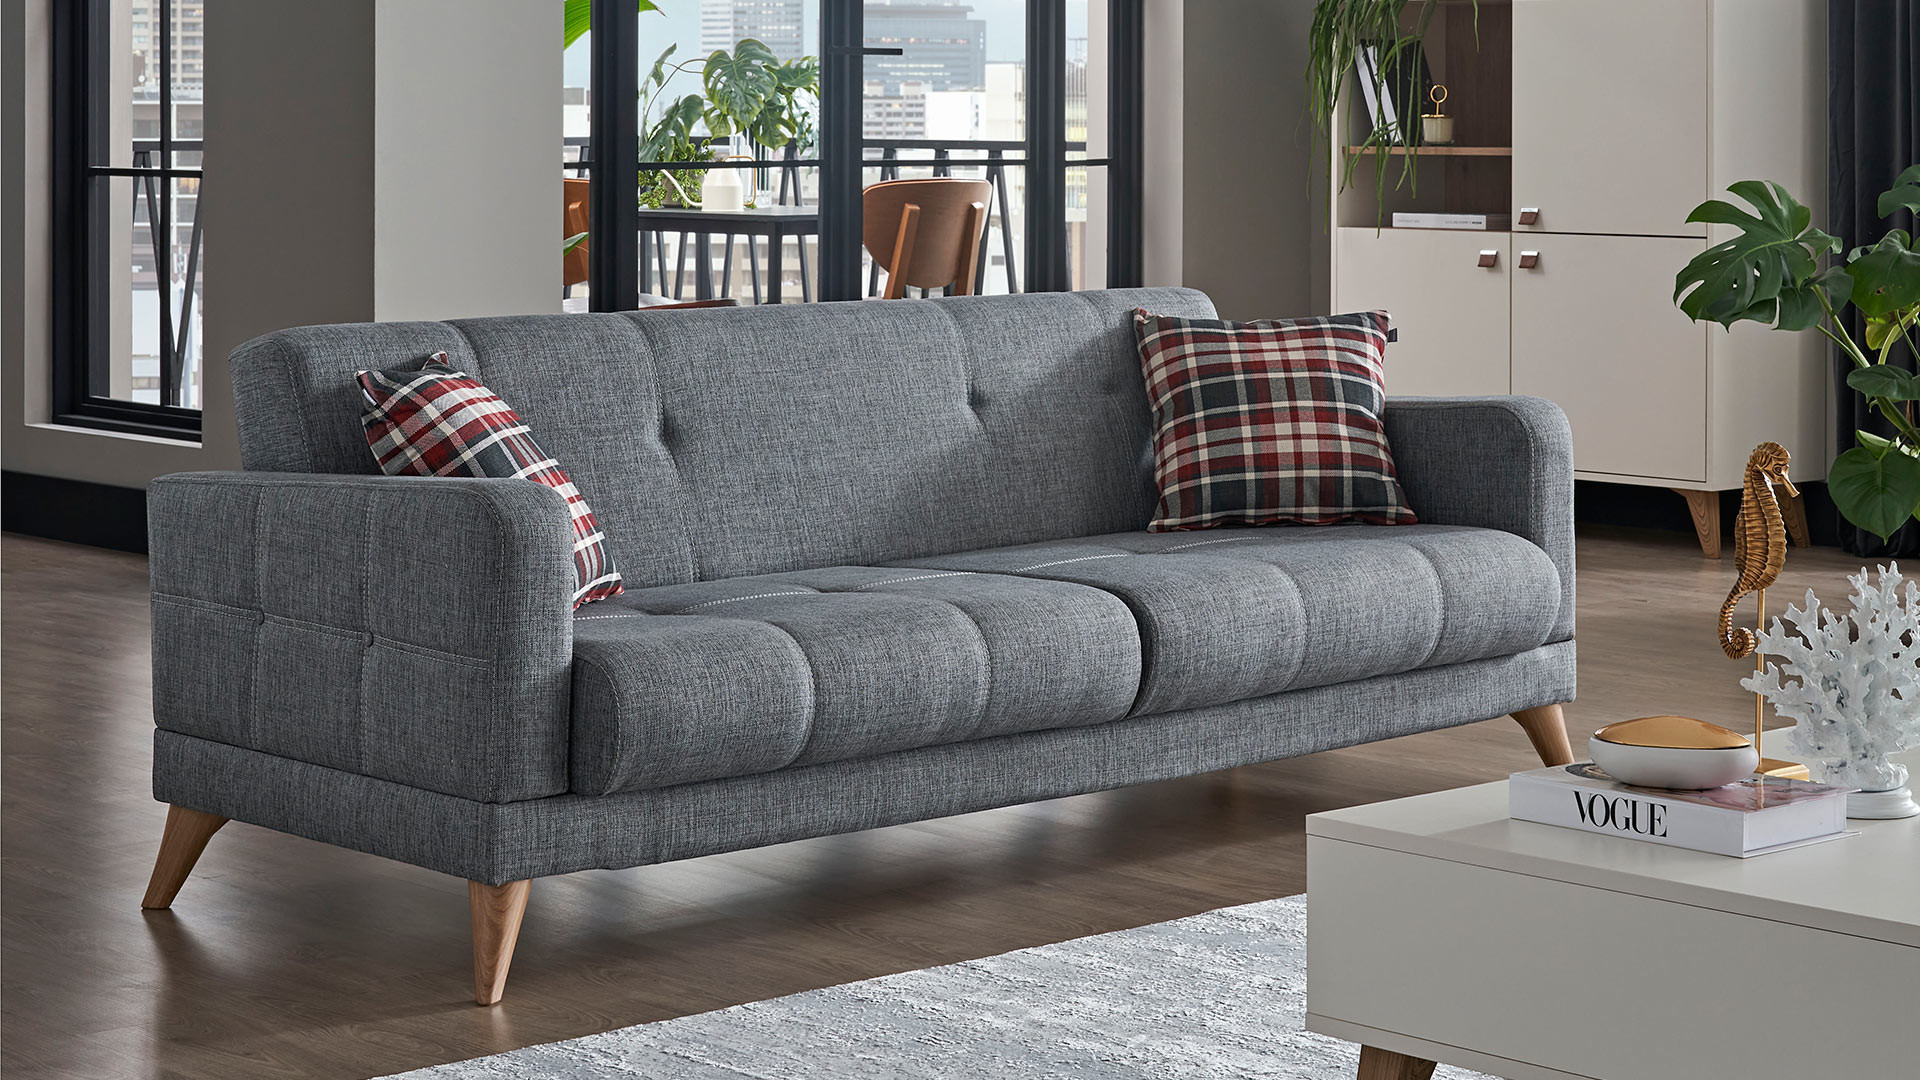 Mayer 3 Seater Sofa Bed